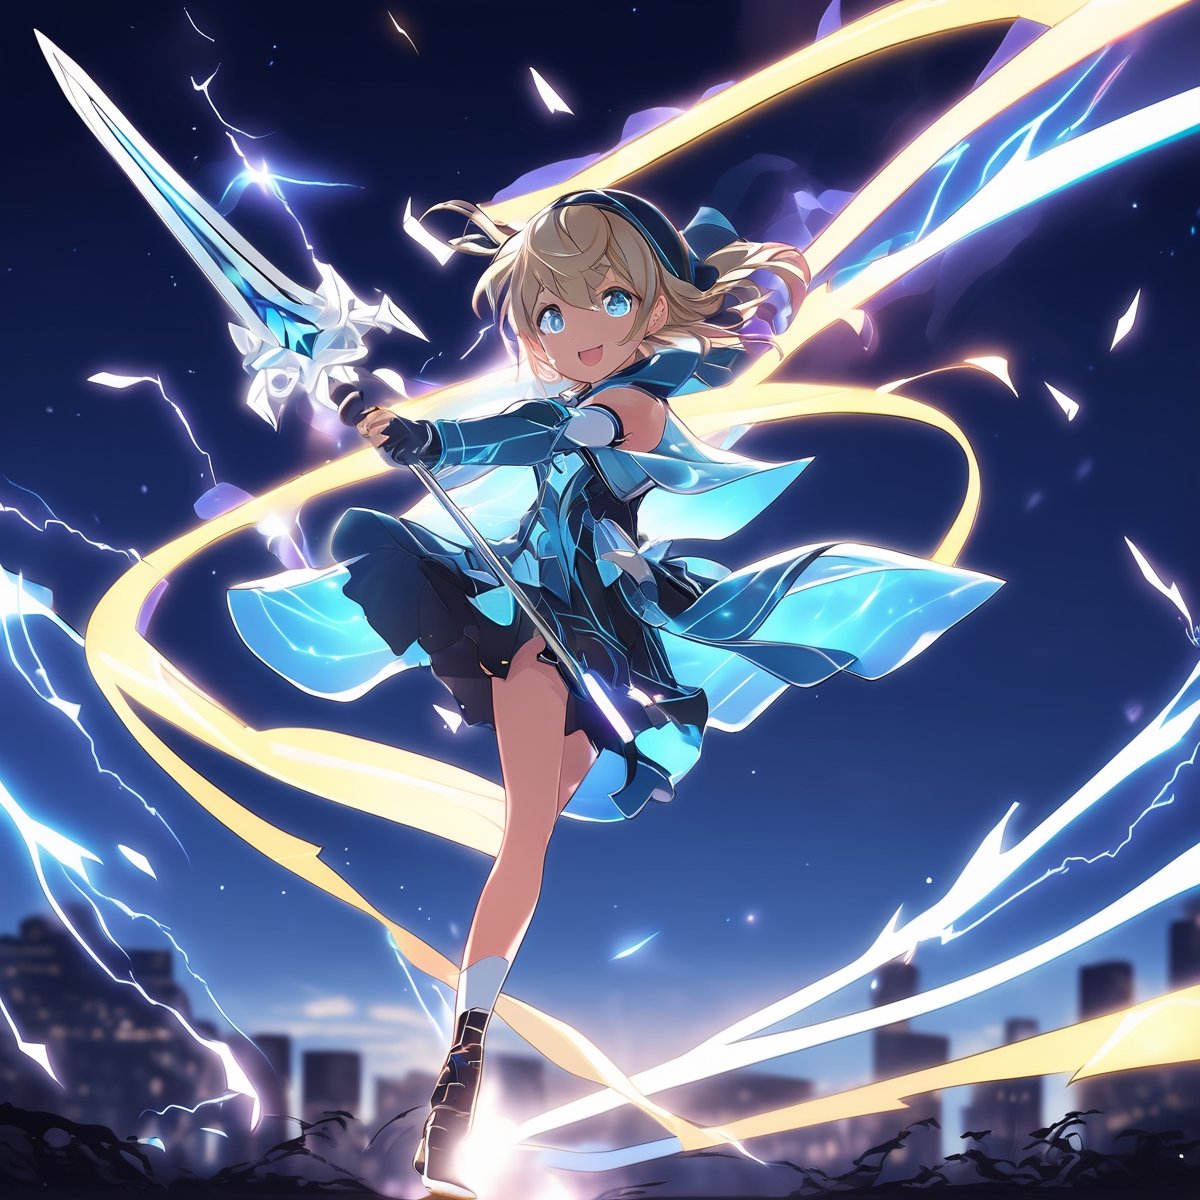 (dark background:1.33), start lights, full body, chibi, (18year old girl:1.5)), Anime SFW image, beautiful girl, slender figure, young adult, random poses, random angles, A composition that captures the whole body, detailed fan art, splash art anime kawaii, official artwork, cheerful, official fan art, cute art style, best quality, best light and shadow, glowing magical staff, wearing Anime Sword Art Online GGO Sinon Cosplay Costume, night view, weightless bouncing hair, 1 girl, anime style, (correct human anatomy:1.5), (one head, two ears, two eyes, one nose, one mouth, two arms, two hands, two legs, five fingers on each hands:1.33), small face features, large expressive eyes, small nose, thin lips, small chin, soft hands, (realism: 1.2), petite, bangs, (trace the contour with detailed intricate white thin lined crackling shimmering vibrant lightning:1.3), (glowing:1.1), (shimmer and twinkl:1.2), luminism, breathtaking fusion of light, indelible impression, high quality, masterpiece, swirling luminescent ribbons, (halloween theme:1.15), 